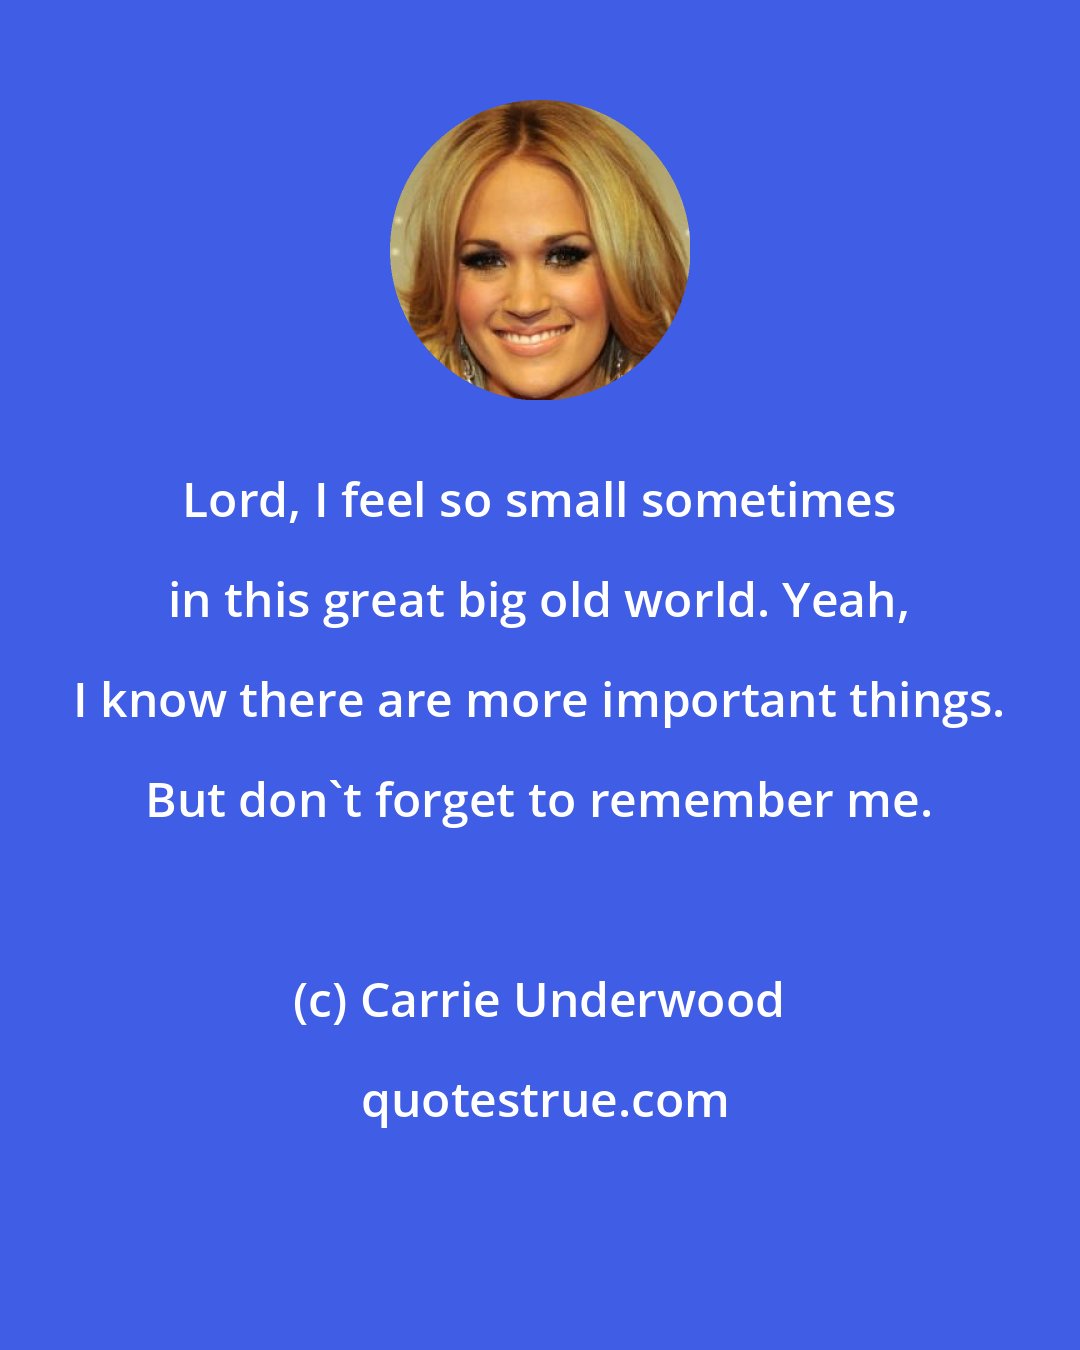 Carrie Underwood: Lord, I feel so small sometimes in this great big old world. Yeah, I know there are more important things. But don't forget to remember me.